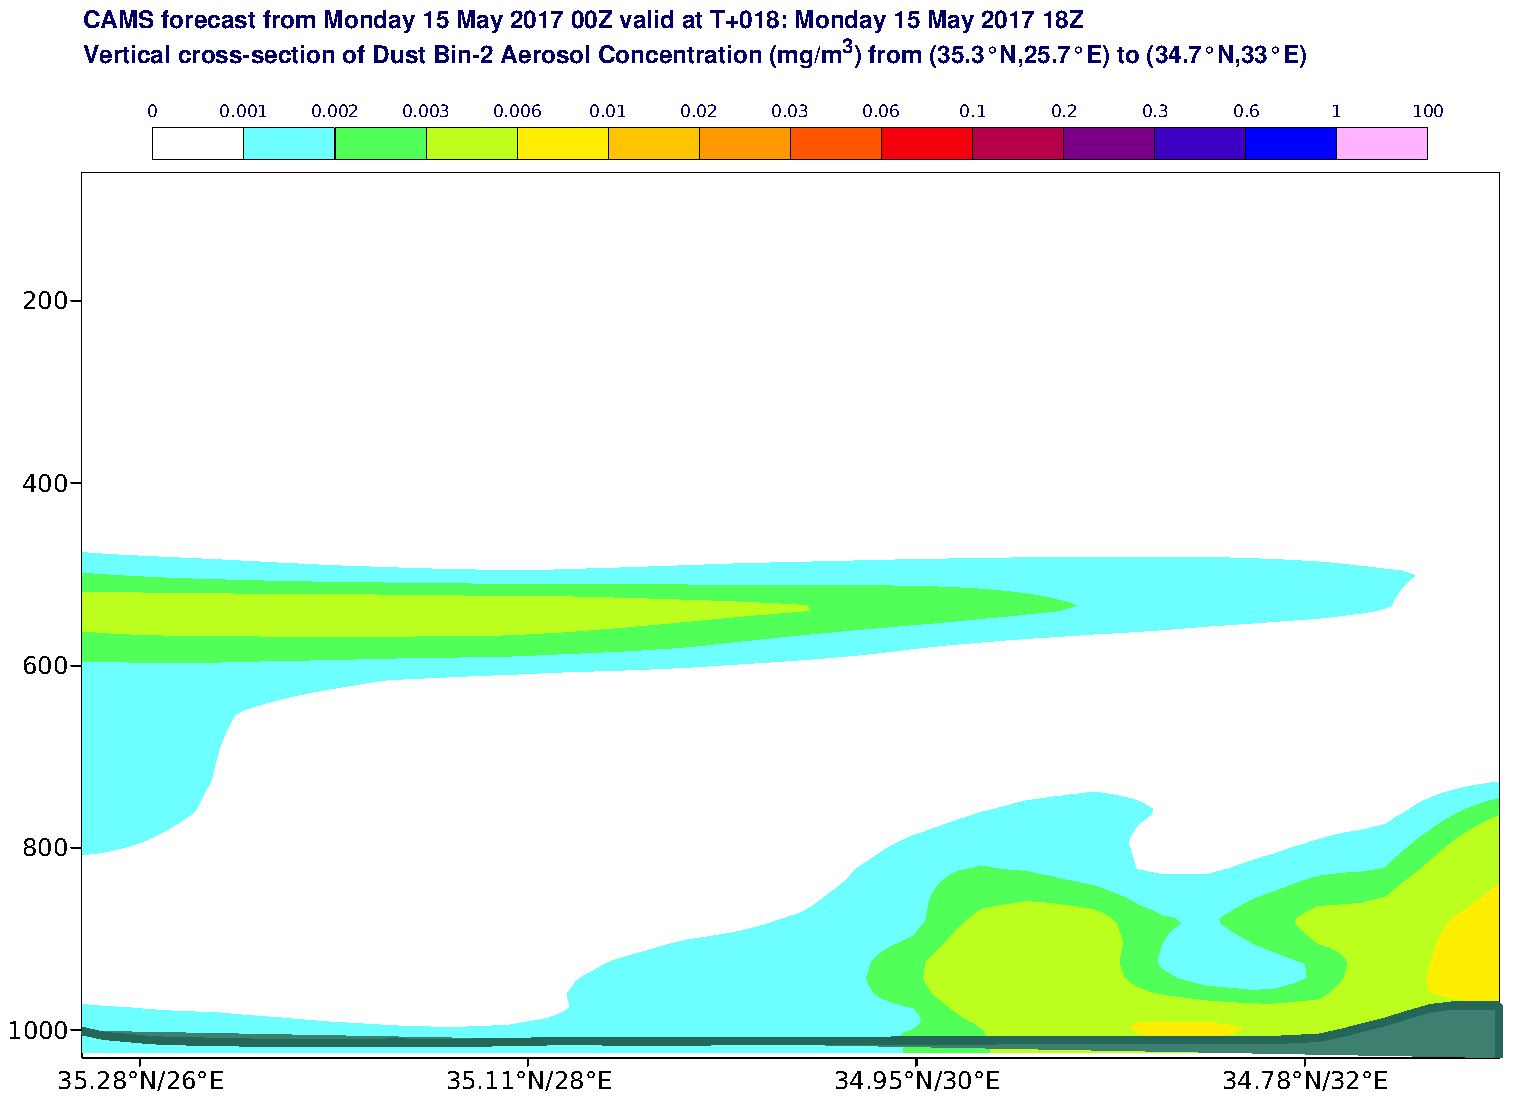 Vertical cross-section of Dust Bin-2 Aerosol Concentration (mg/m3) valid at T18 - 2017-05-15 18:00